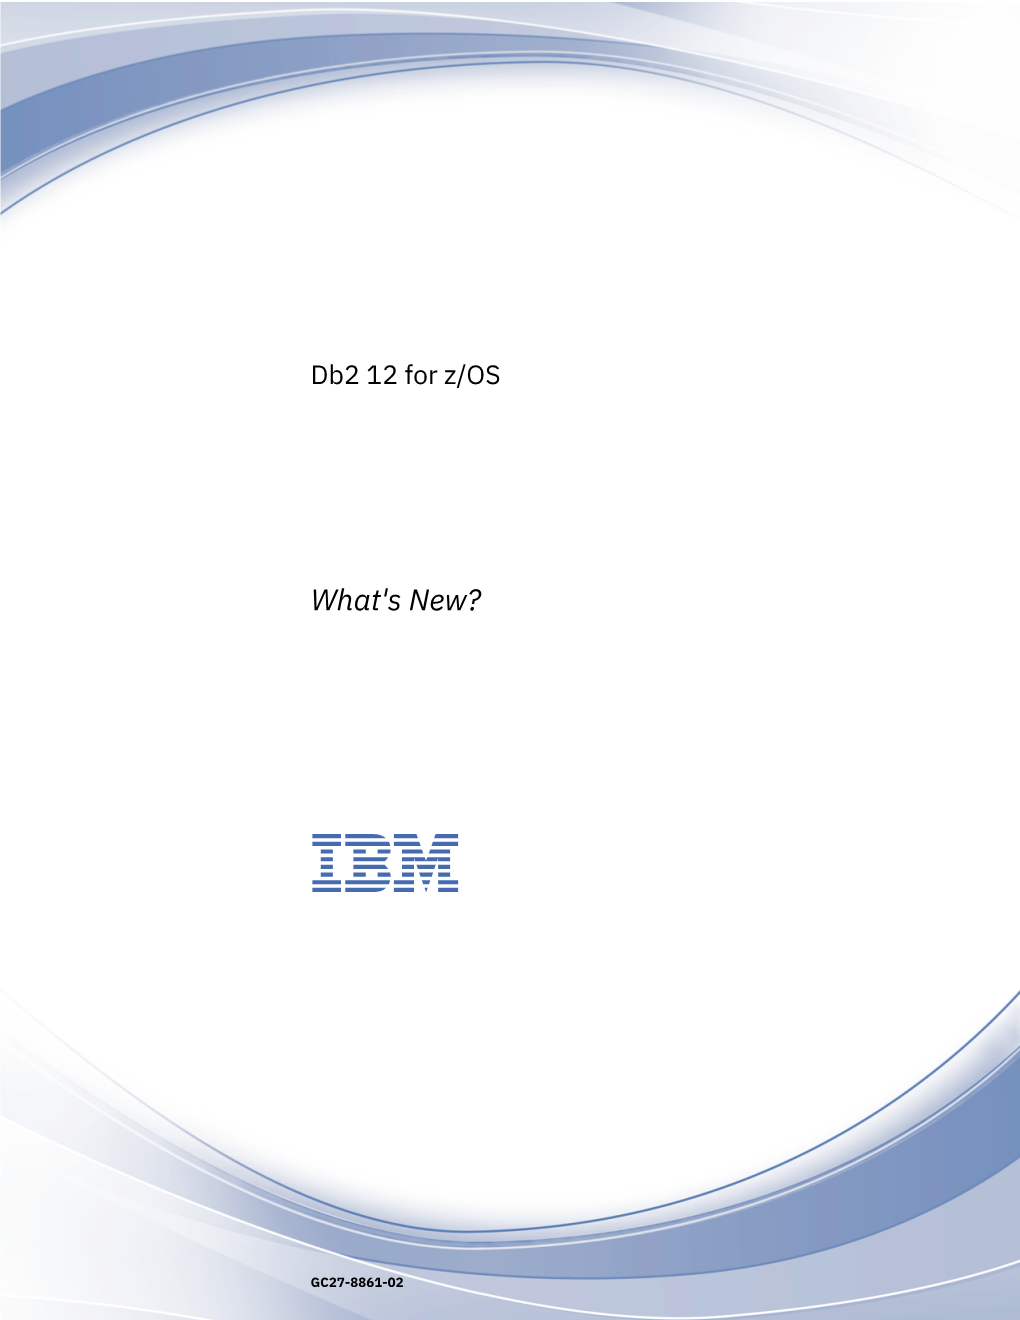 Db2 12 for Z/OS: What's New? Part 1